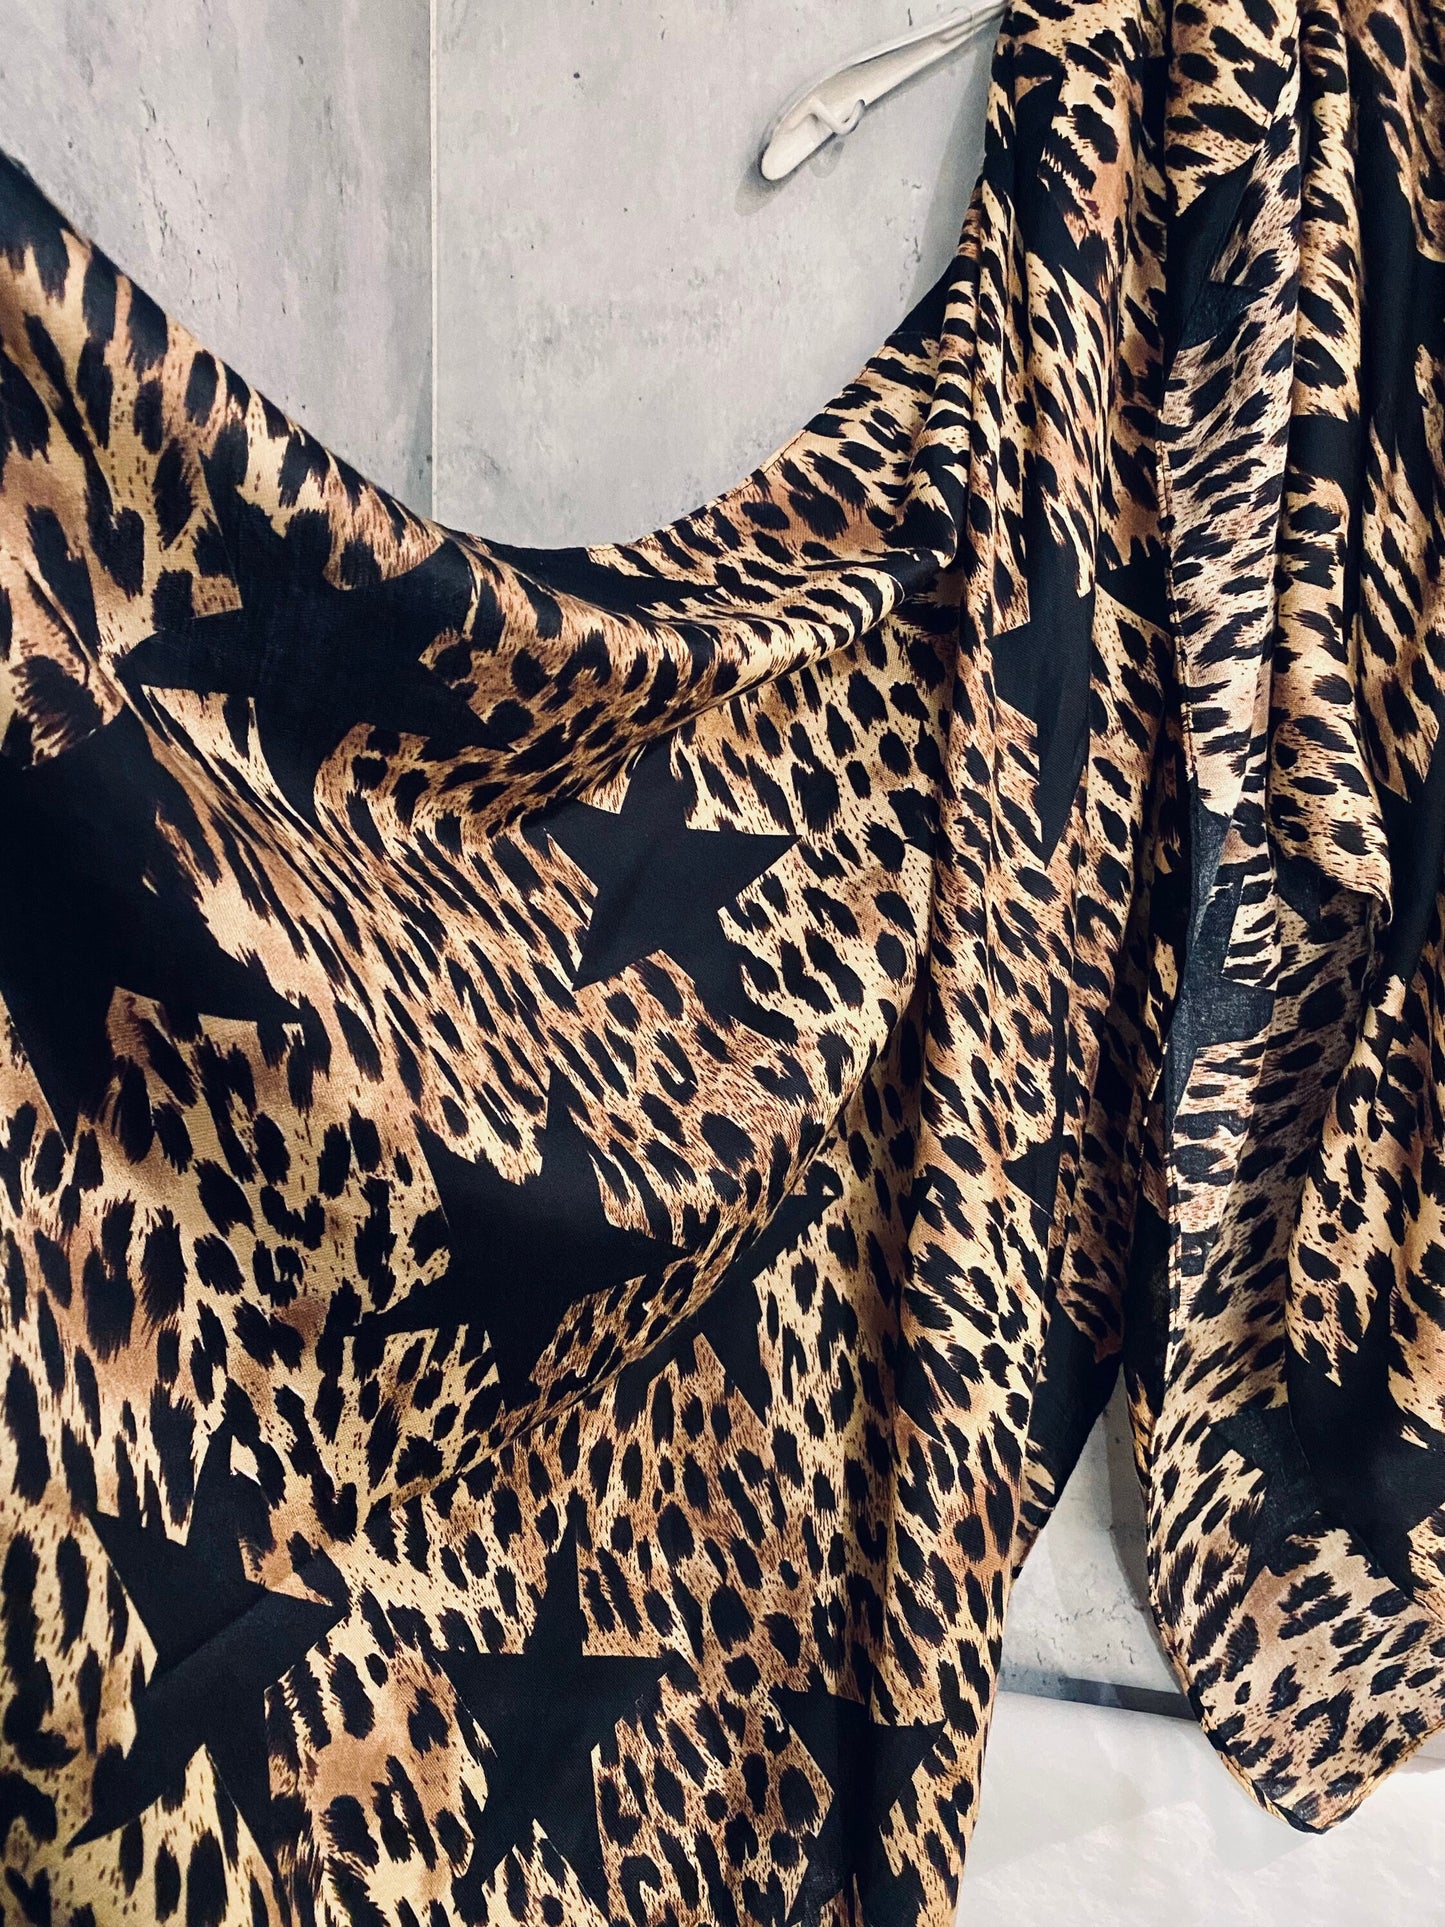 Leopard With Star Pattern Brown Cotton Scarf/Summer Autumn Scarf/Gifts For Mom/Gifts For Her Birthday Christmas/UK Seller/Scarf Women